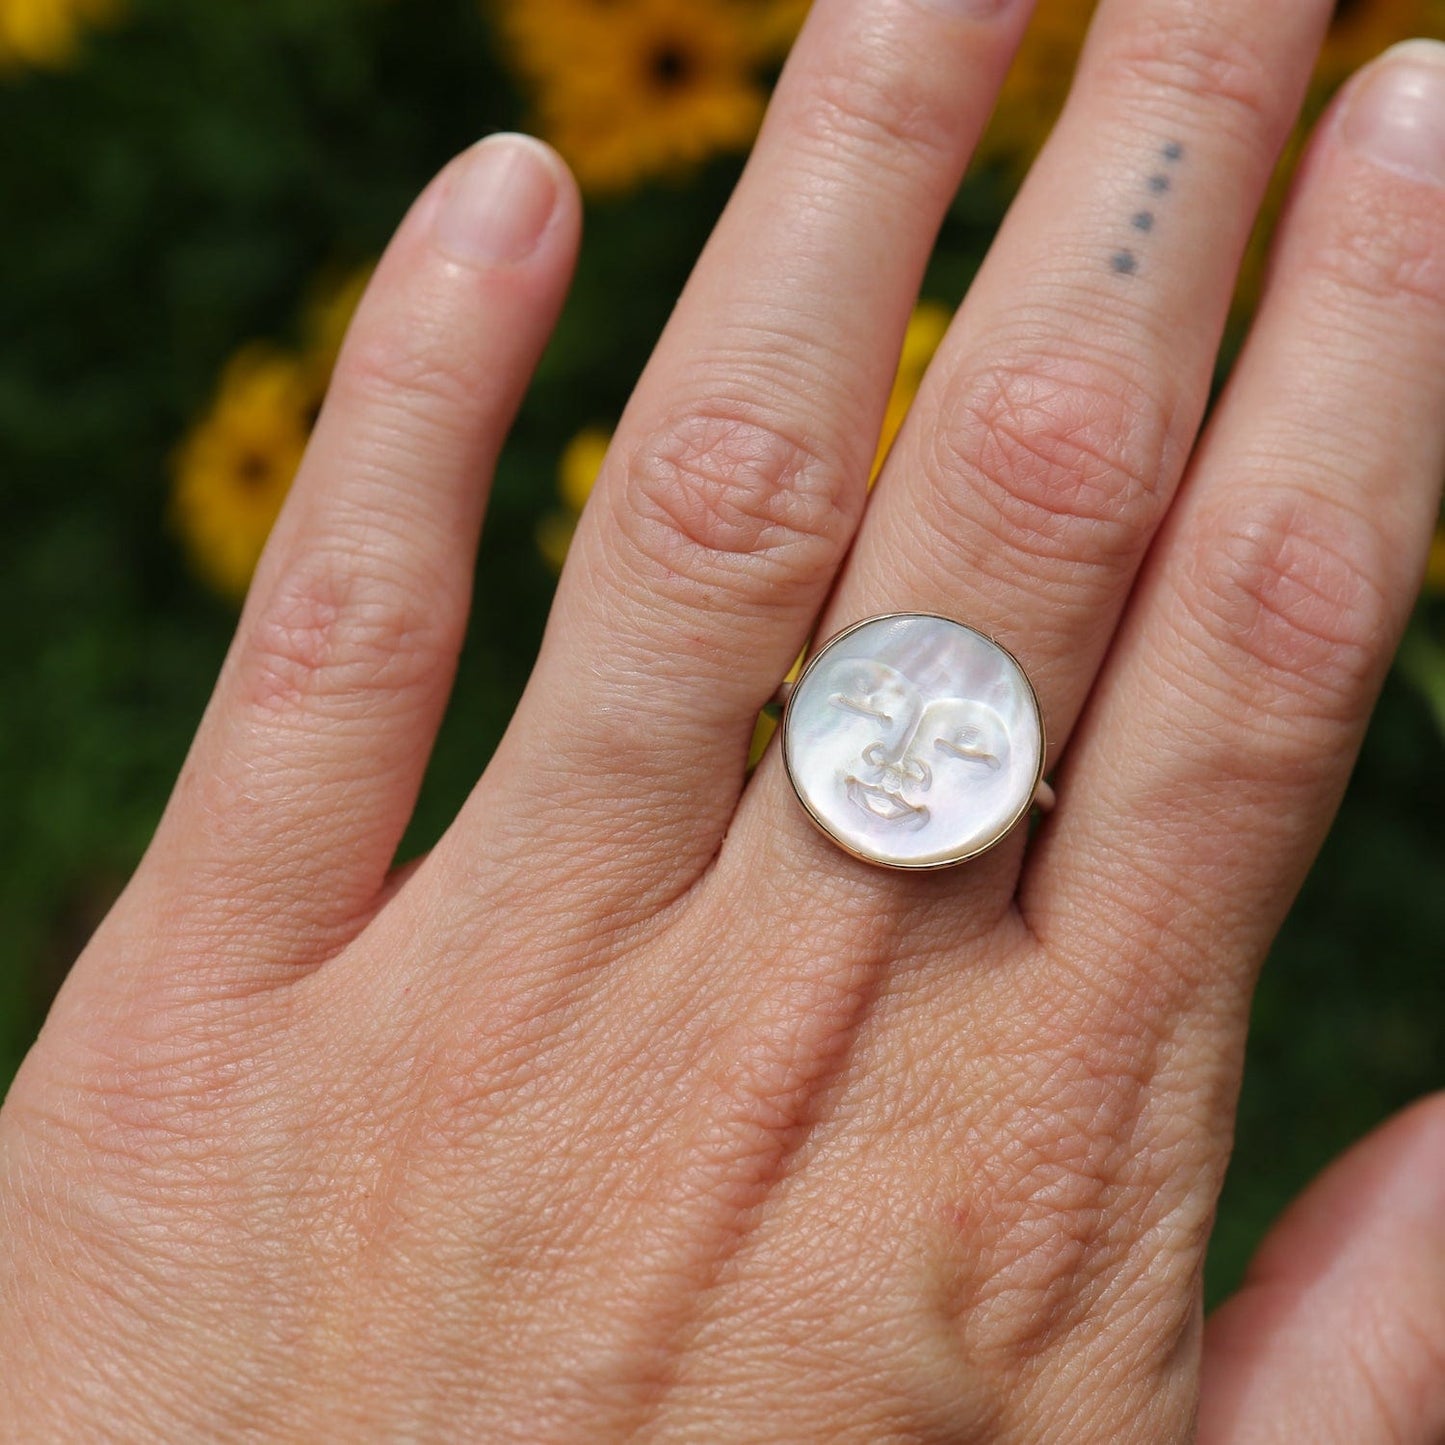 RNG-14K Lunarian Ring - Mother of Pearl